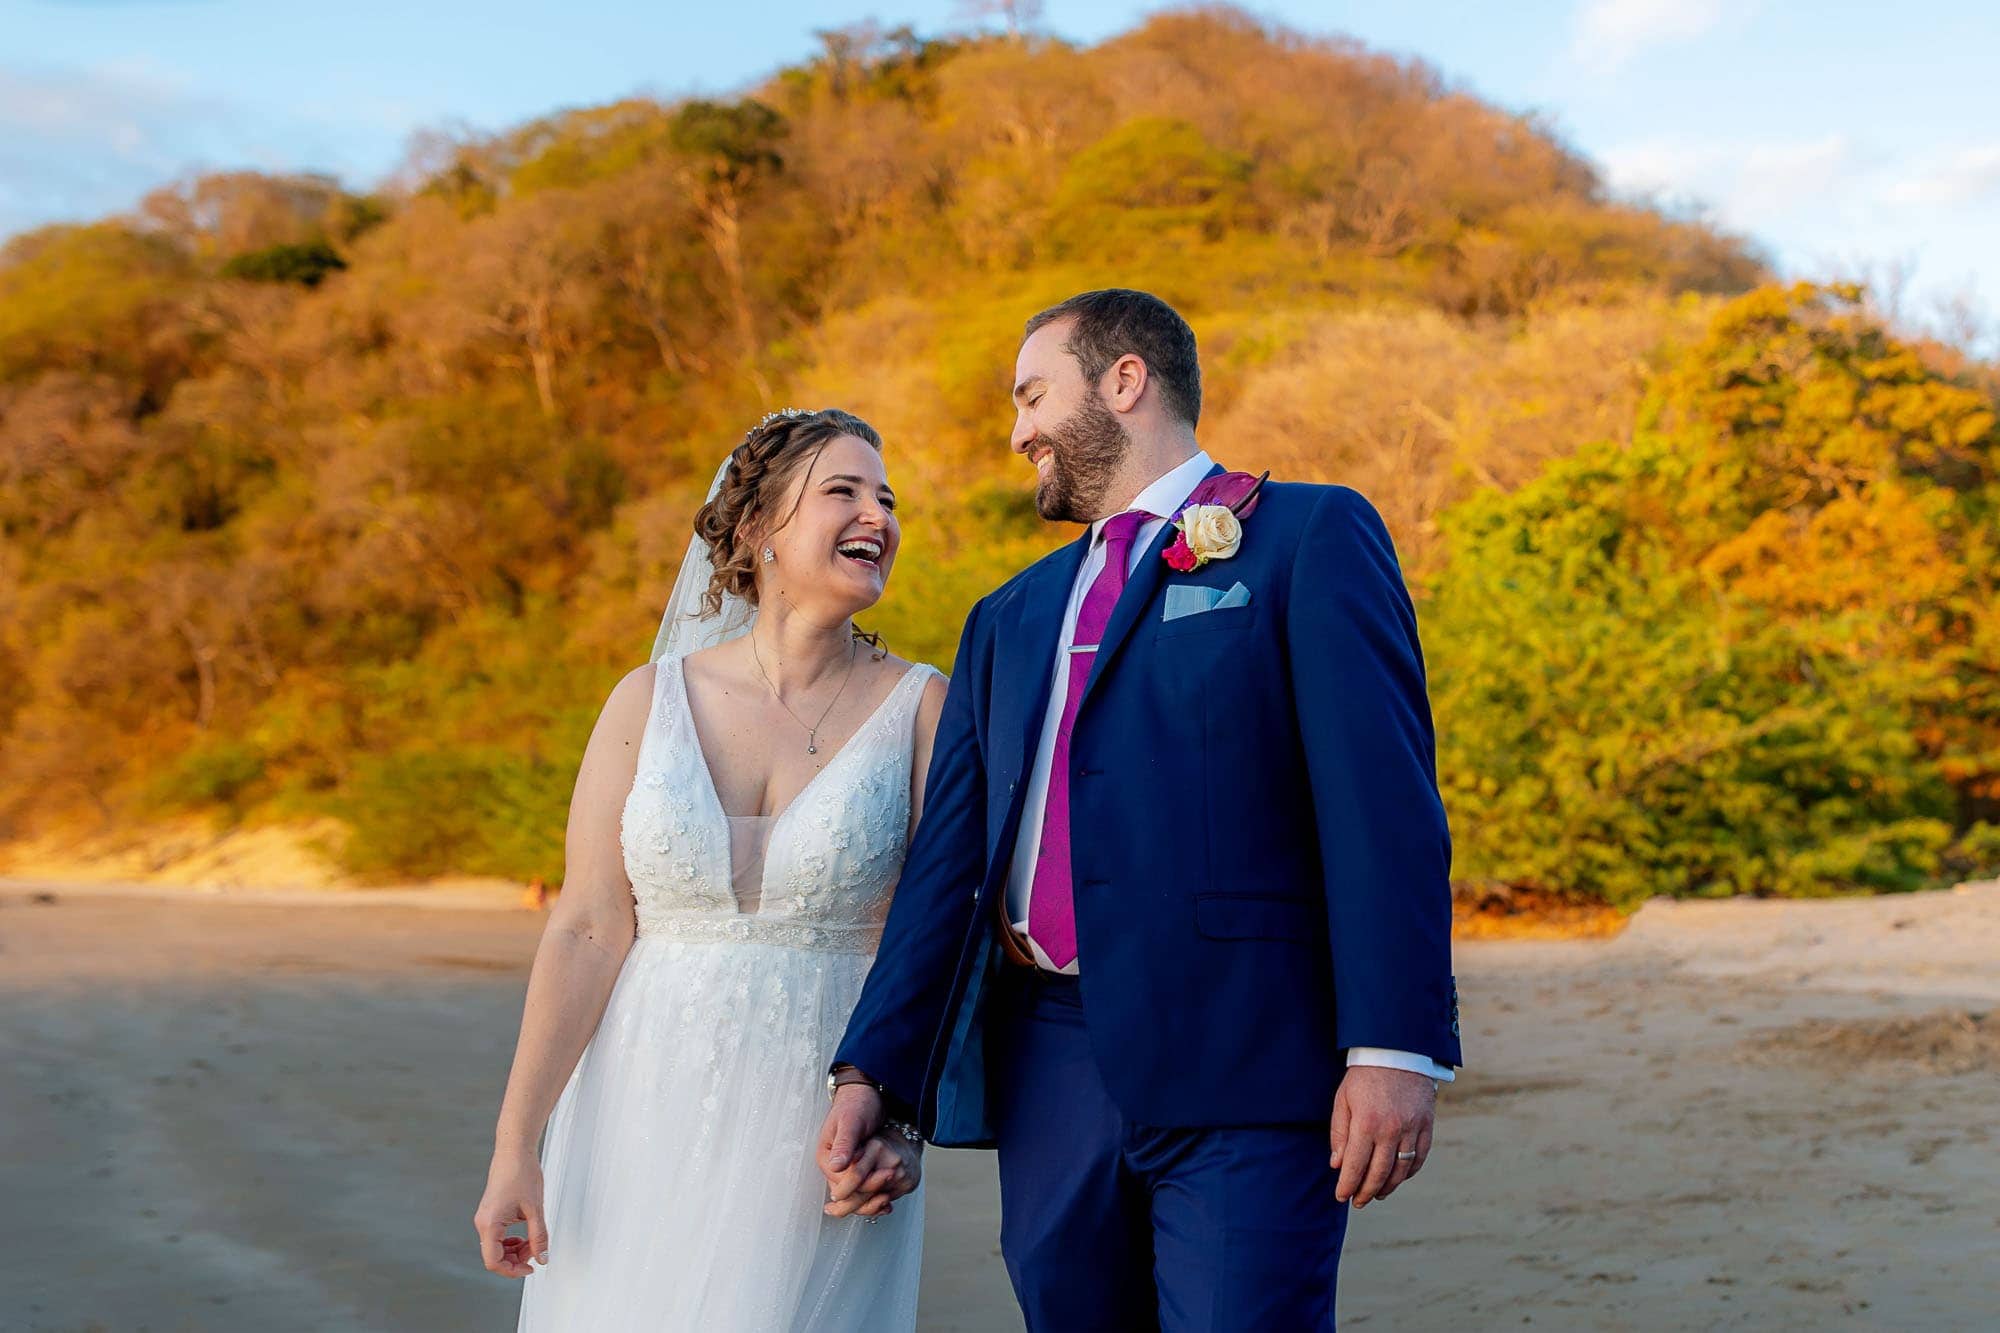 Bride and groom laughing on the beach